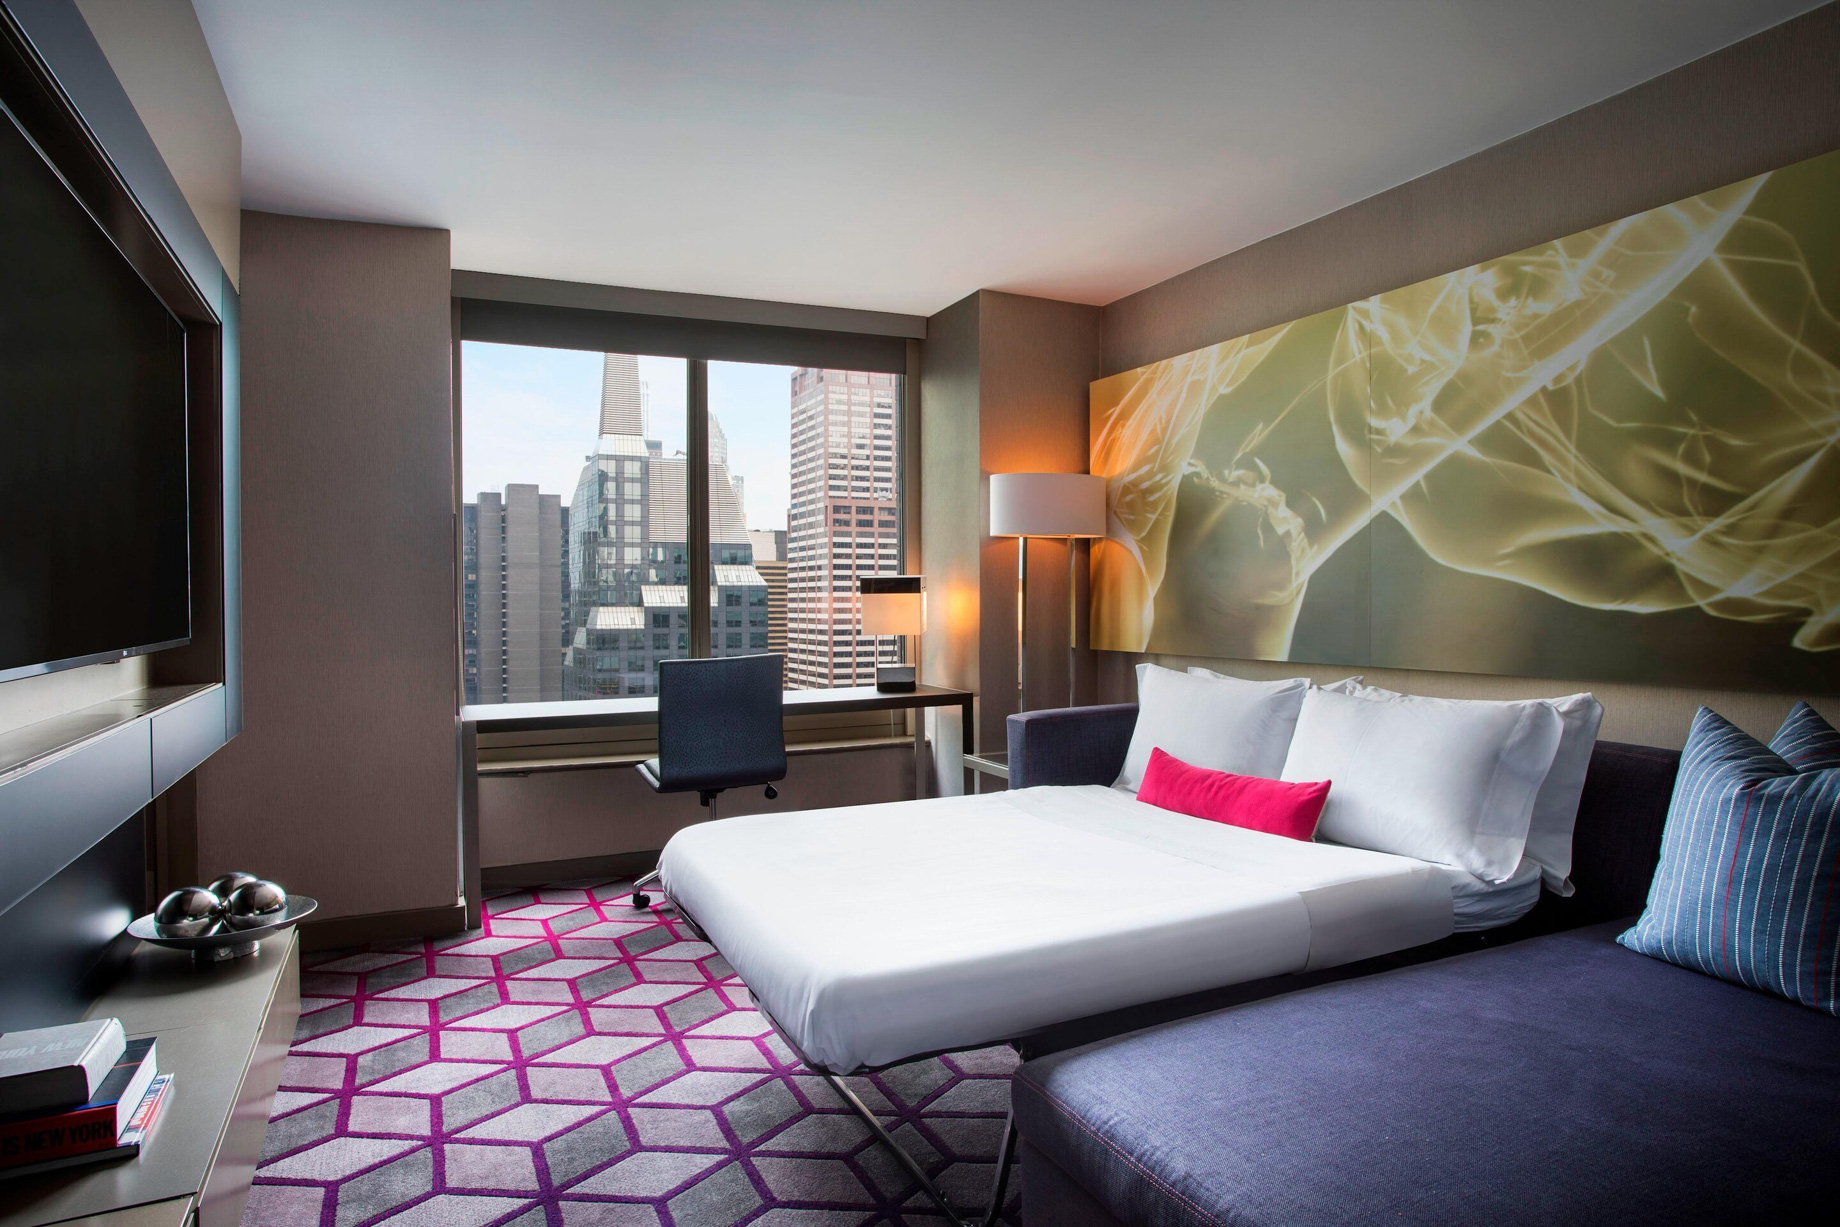 W New York Times Square Hotel - New York, NY, USA - Suite Sofabed Open